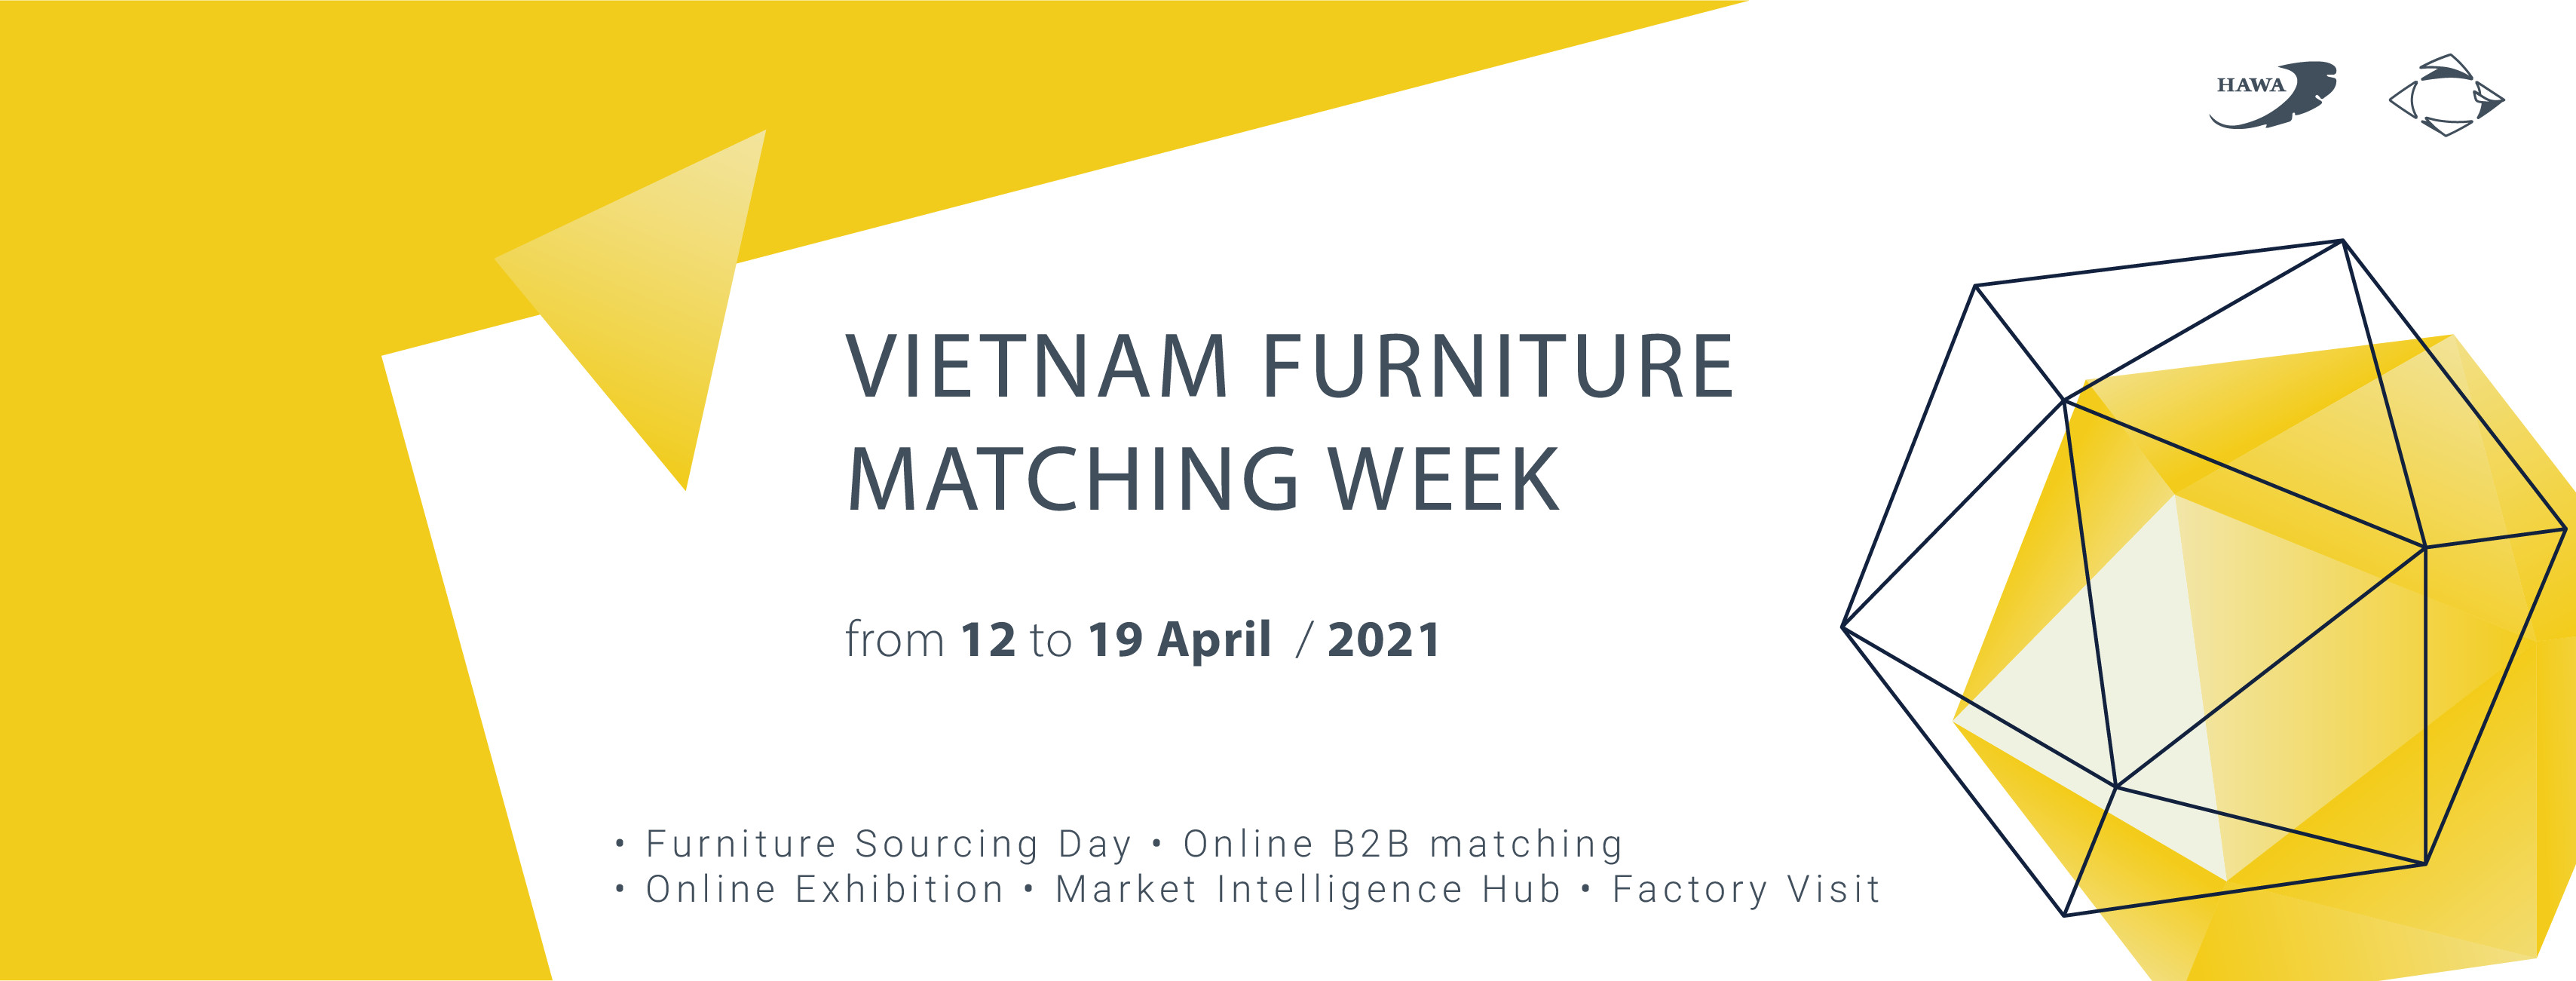 HTV9 Business Stories covering the Vietnam Furniture Matching Week event